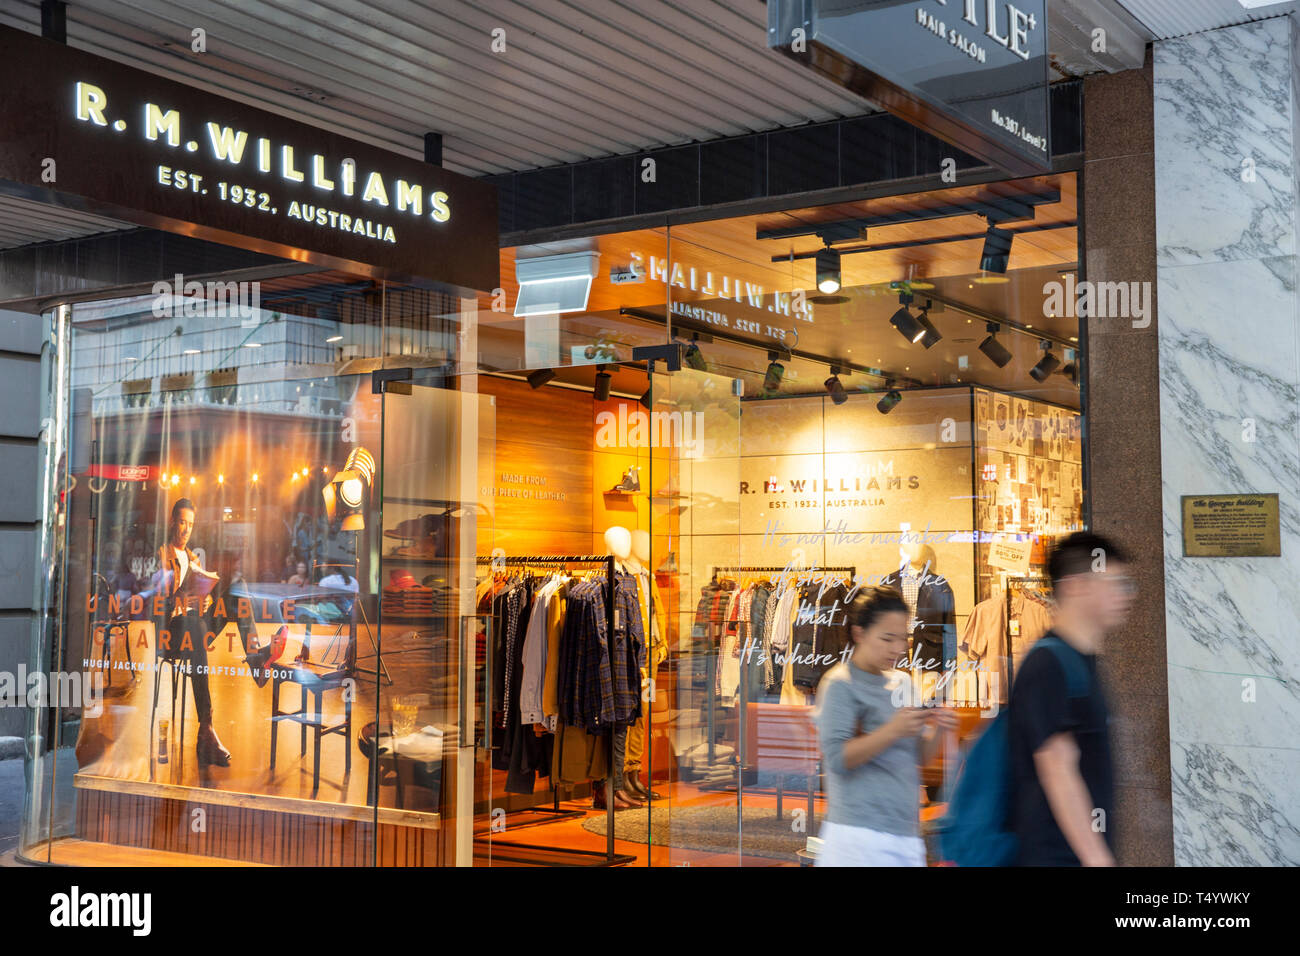 RM Williams boots and clothing store in Sydney, an iconic australian brand particularly for their boots,Sydney,Australia Stock Photo